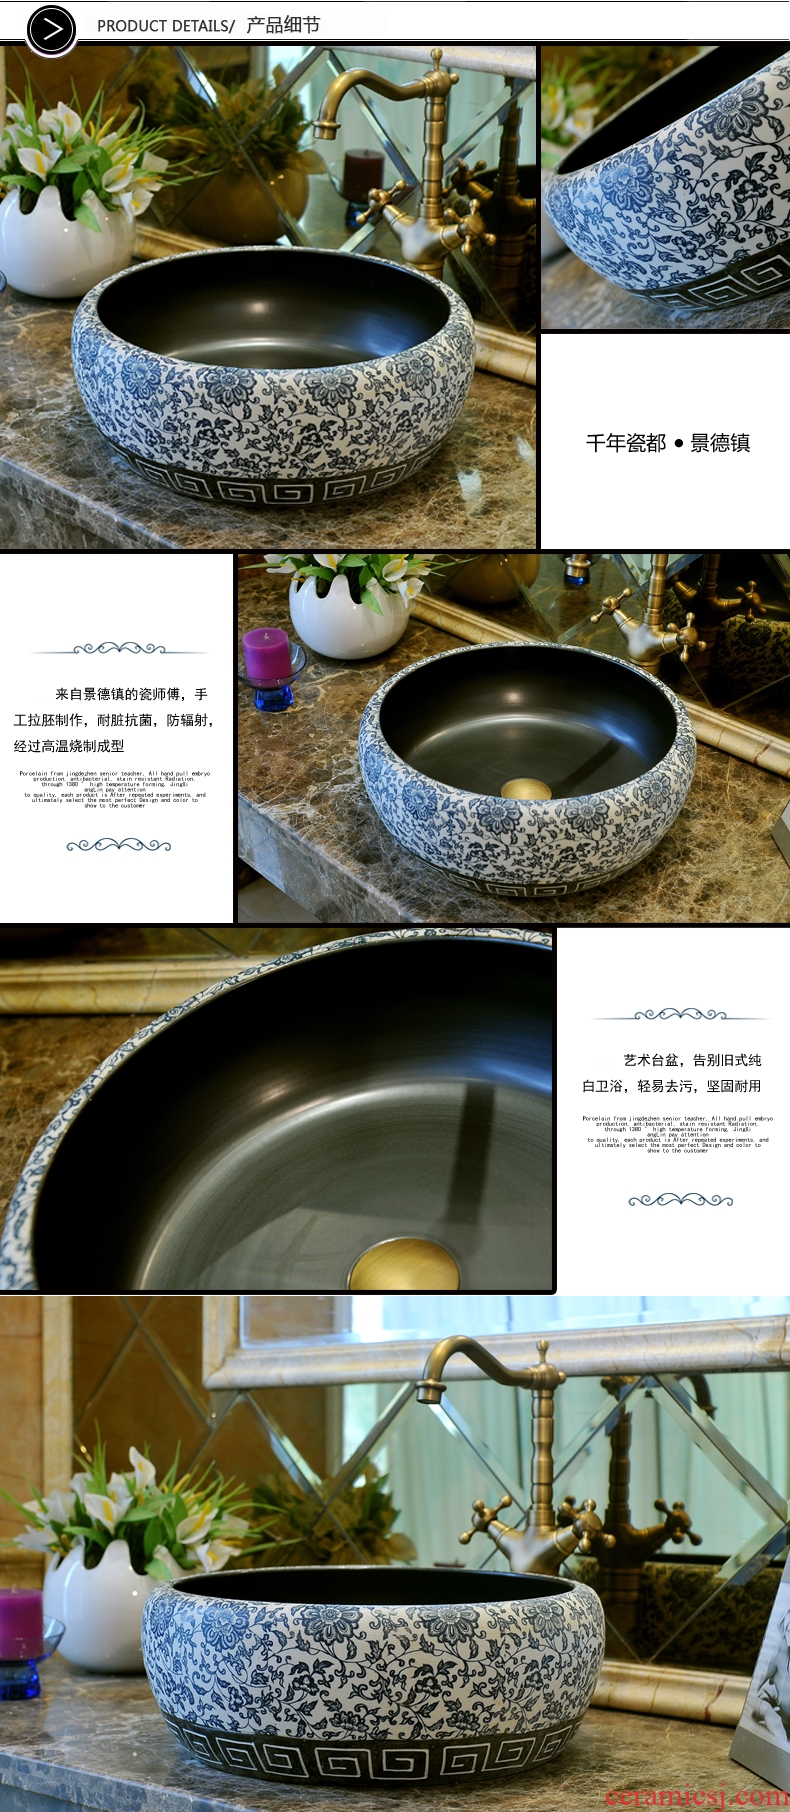 JingXiangLin European contracted jingdezhen art basin lavatory sink the stage basin & ndash; Blue and white and exquisite